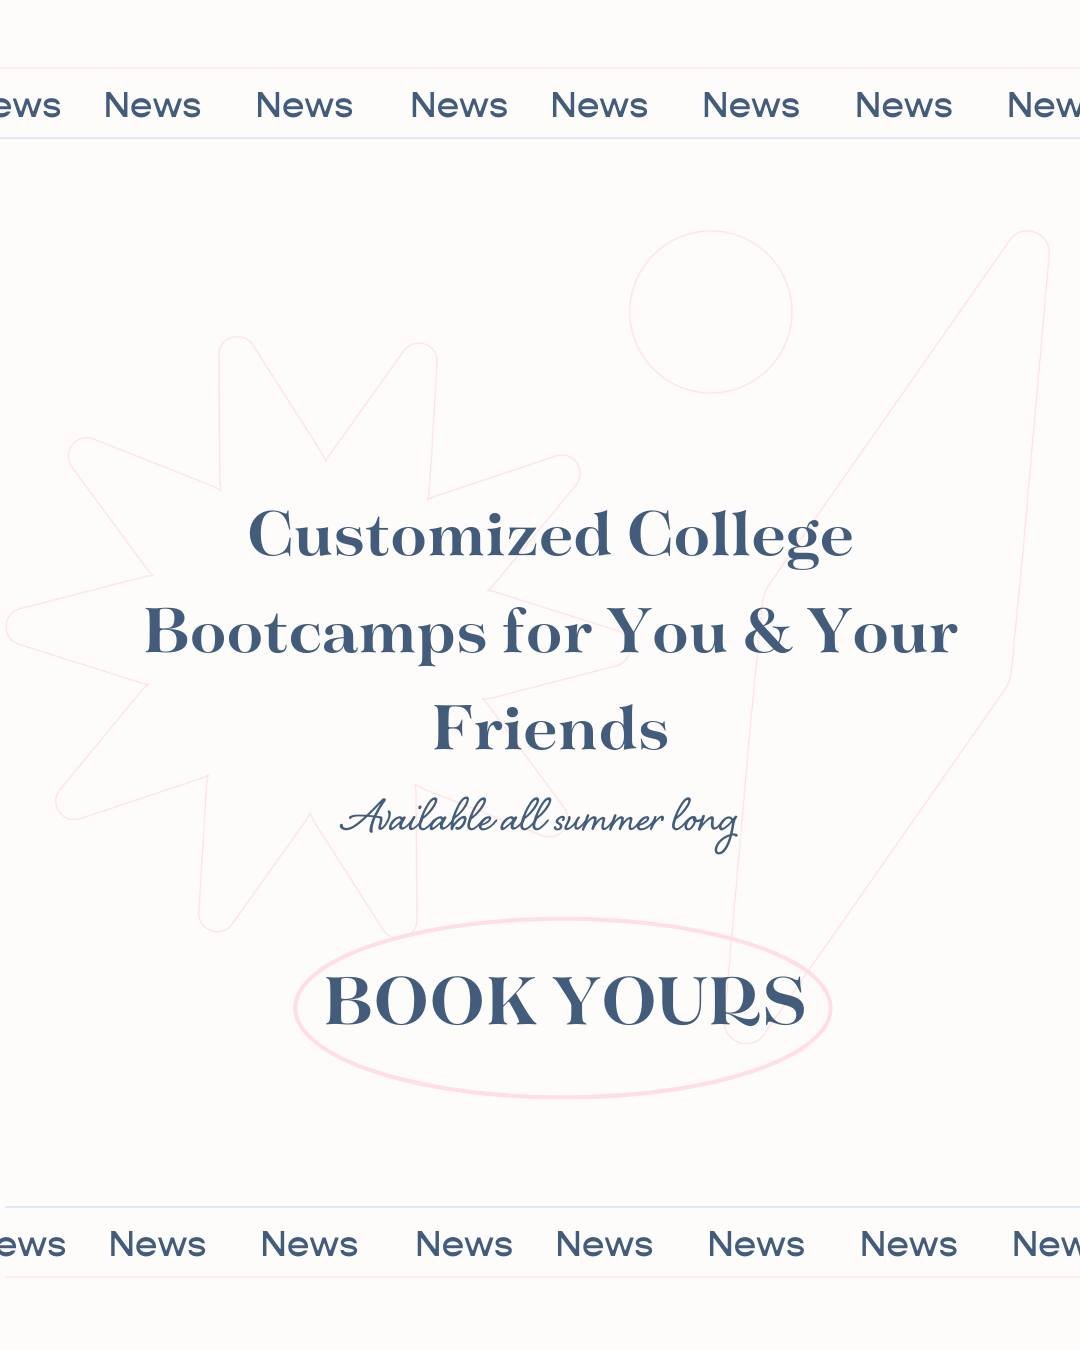 Missed our bootcamp dates? No worries! Gather a group of 5-10 friends, and we'll create a custom college essay and application support bootcamp that fits your schedule. Contact us to get started! 📚✍️ #CollegeReady #CustomizedService